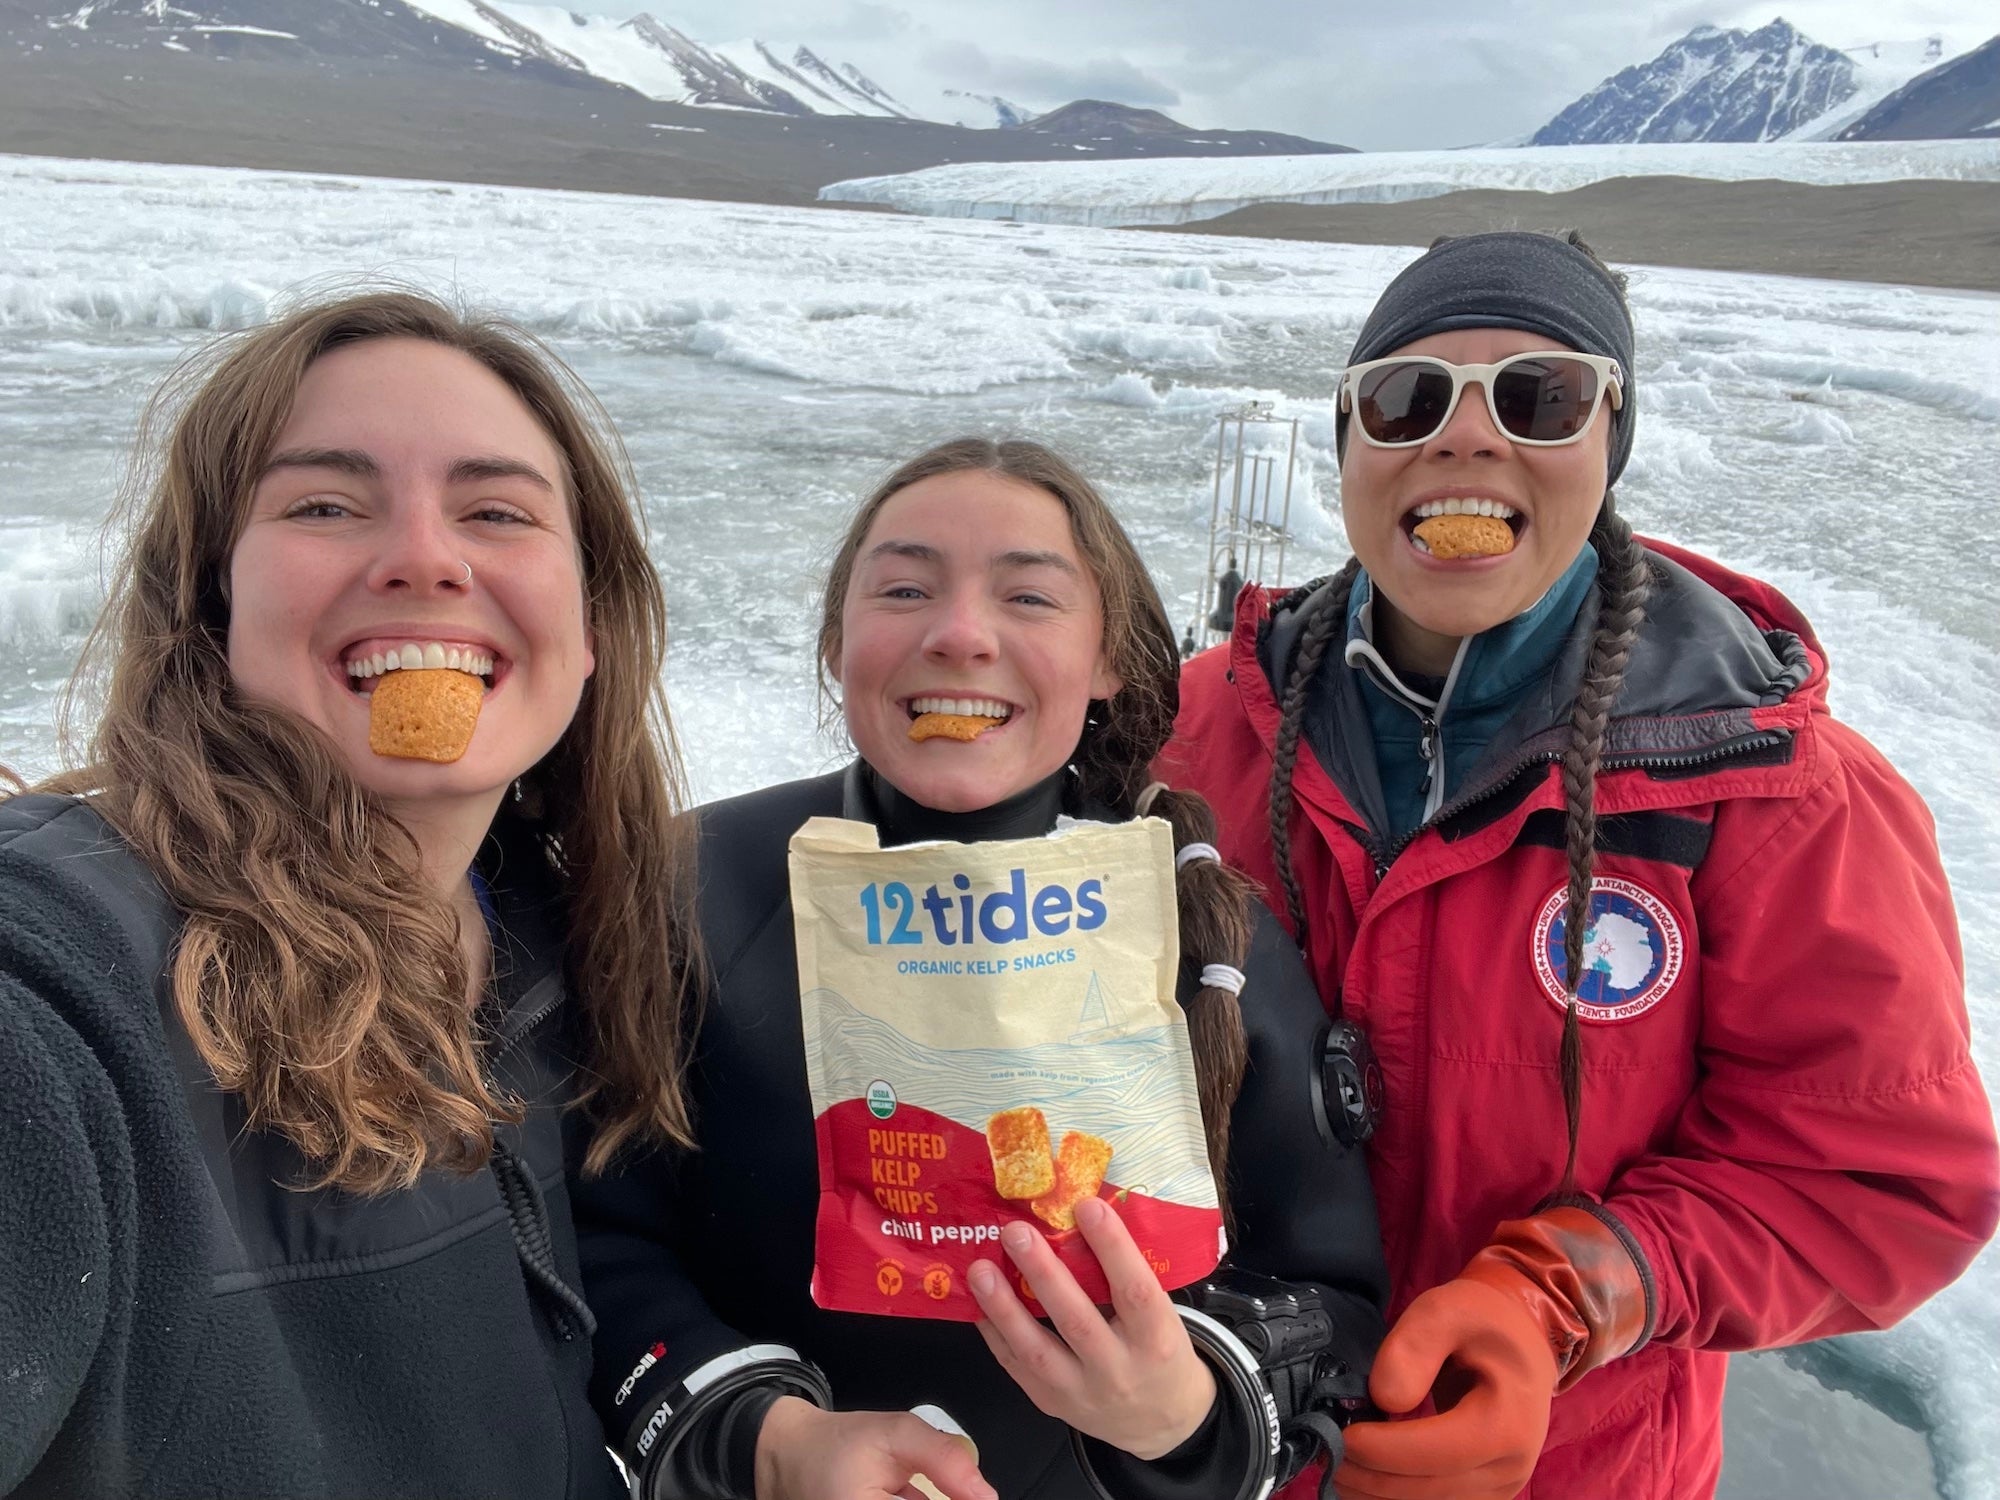 Our friends eating chili kelp chips in Antarctica!